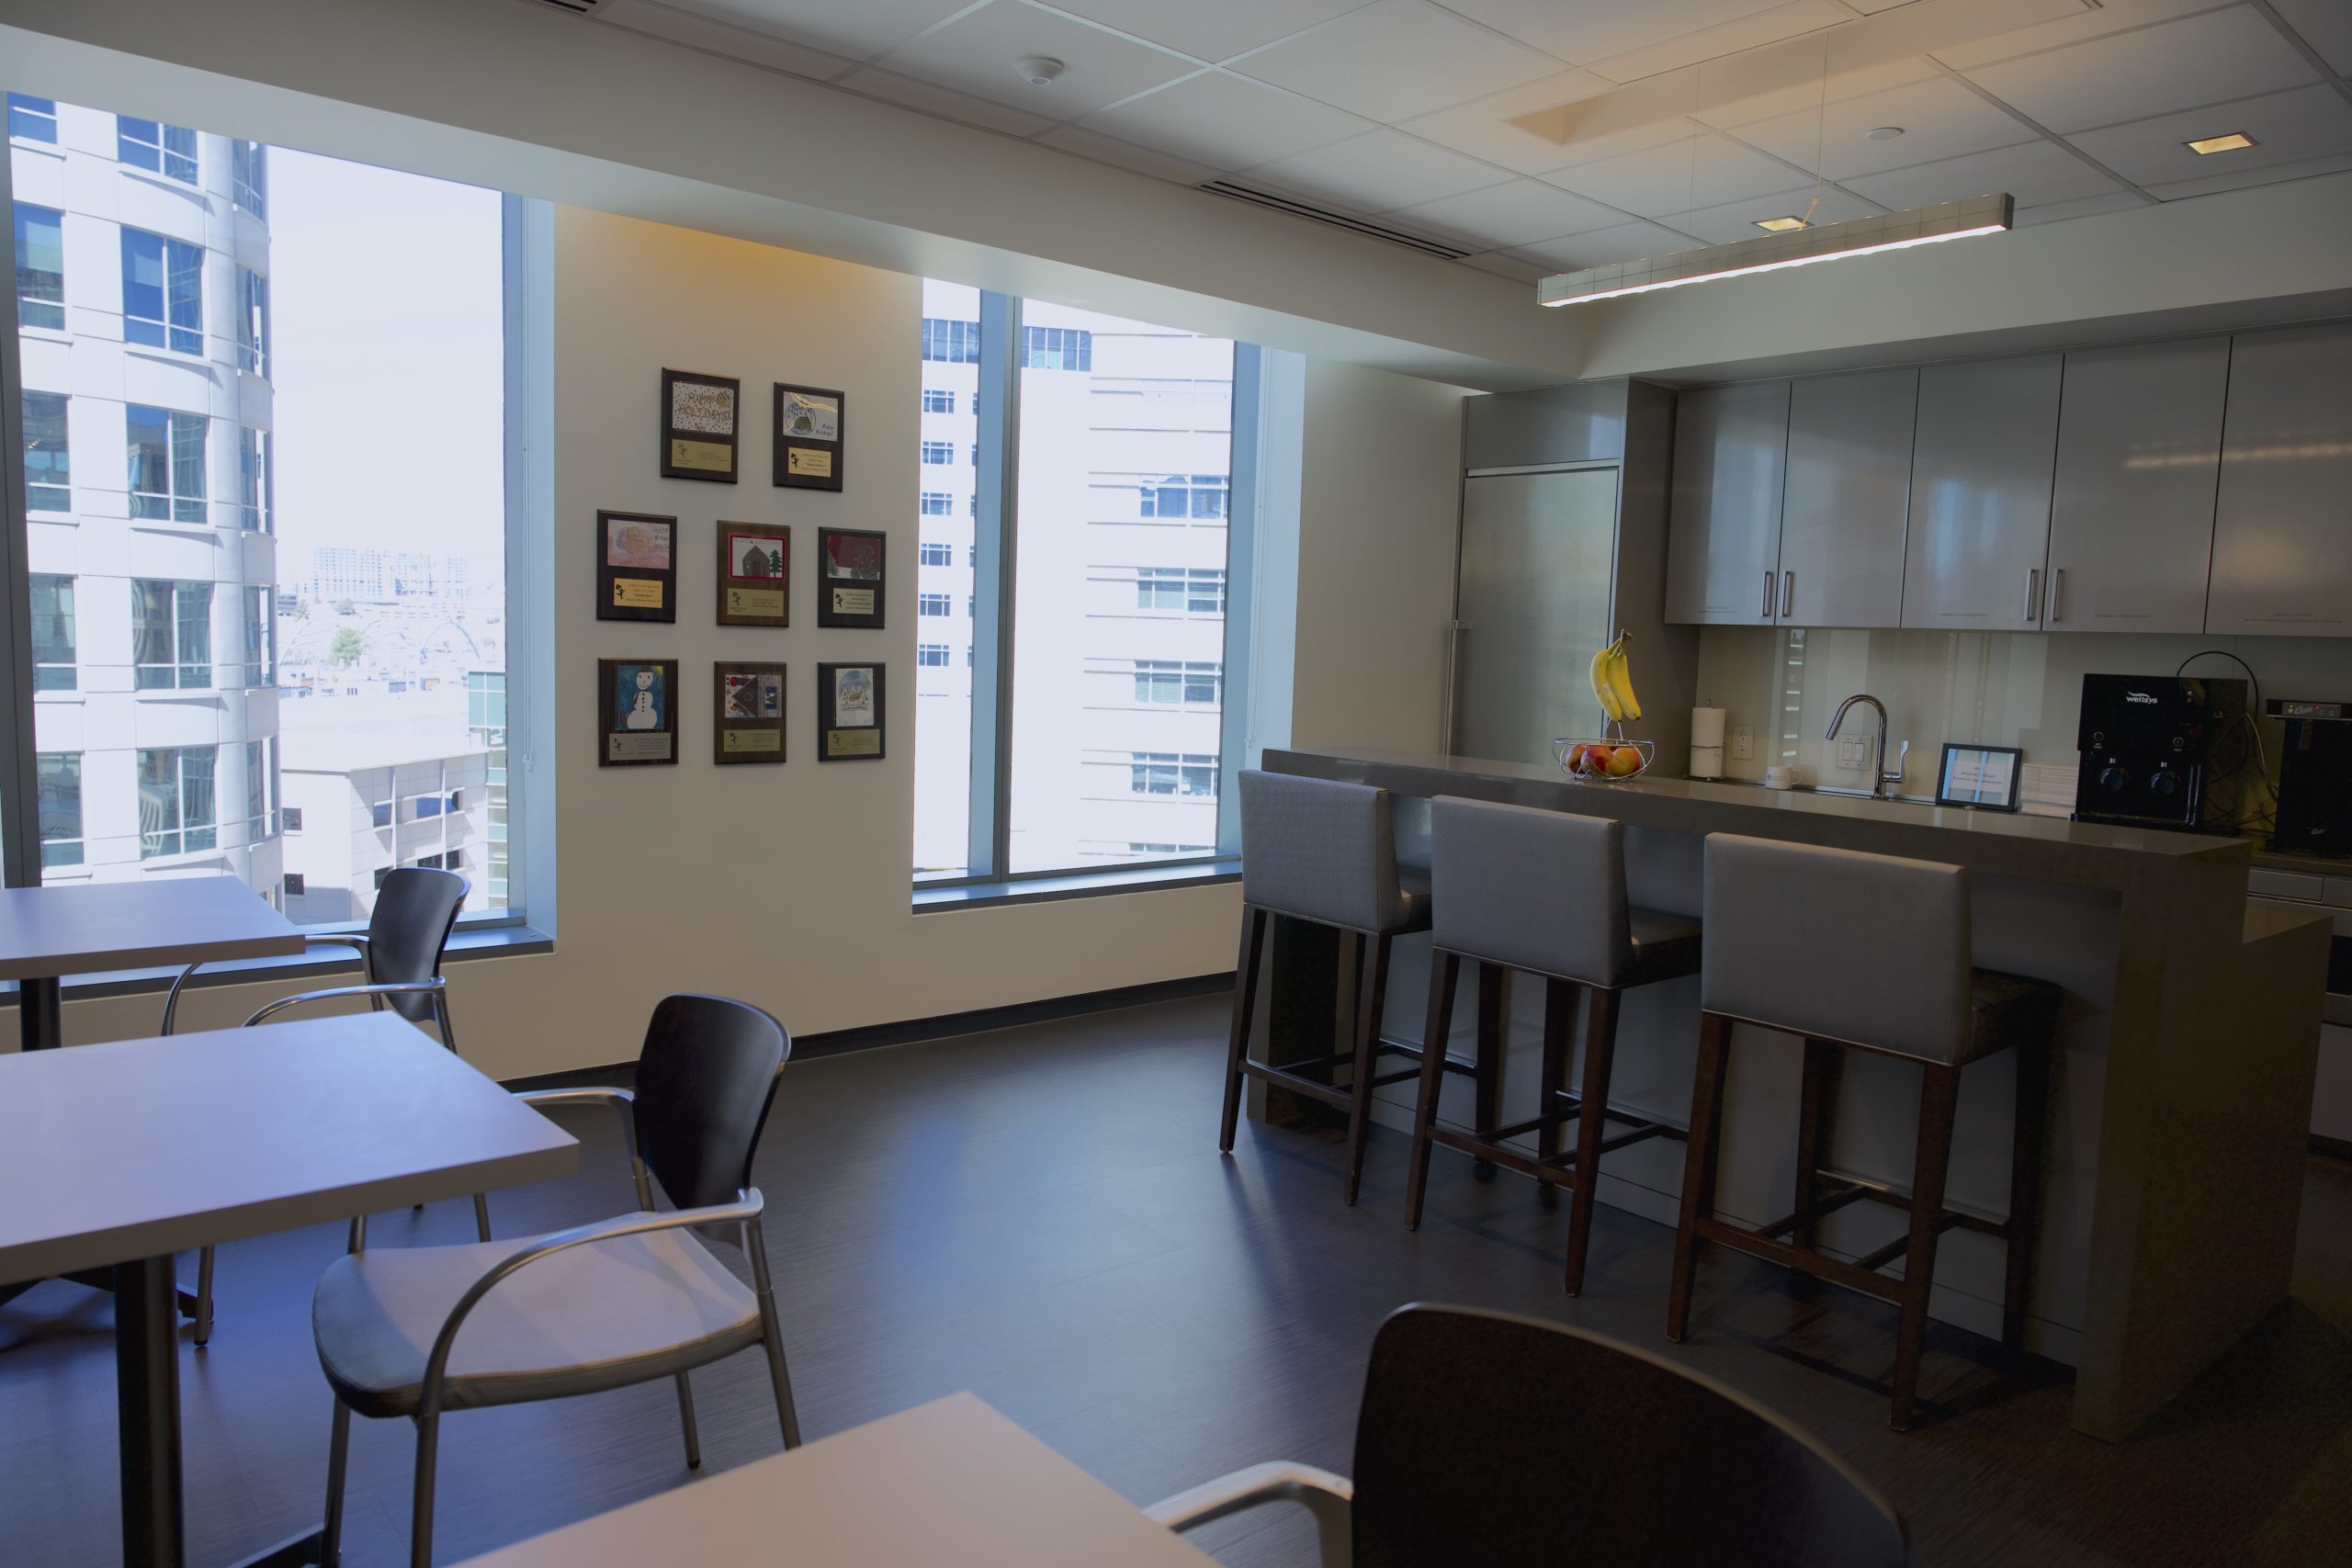 A modern office kitchen. Three small tables line one wall, a kitchen and counter with stools are on the other. Large windows show the downtown skyline outside. On a wall are eight small frames with children's drawings and plaques. 